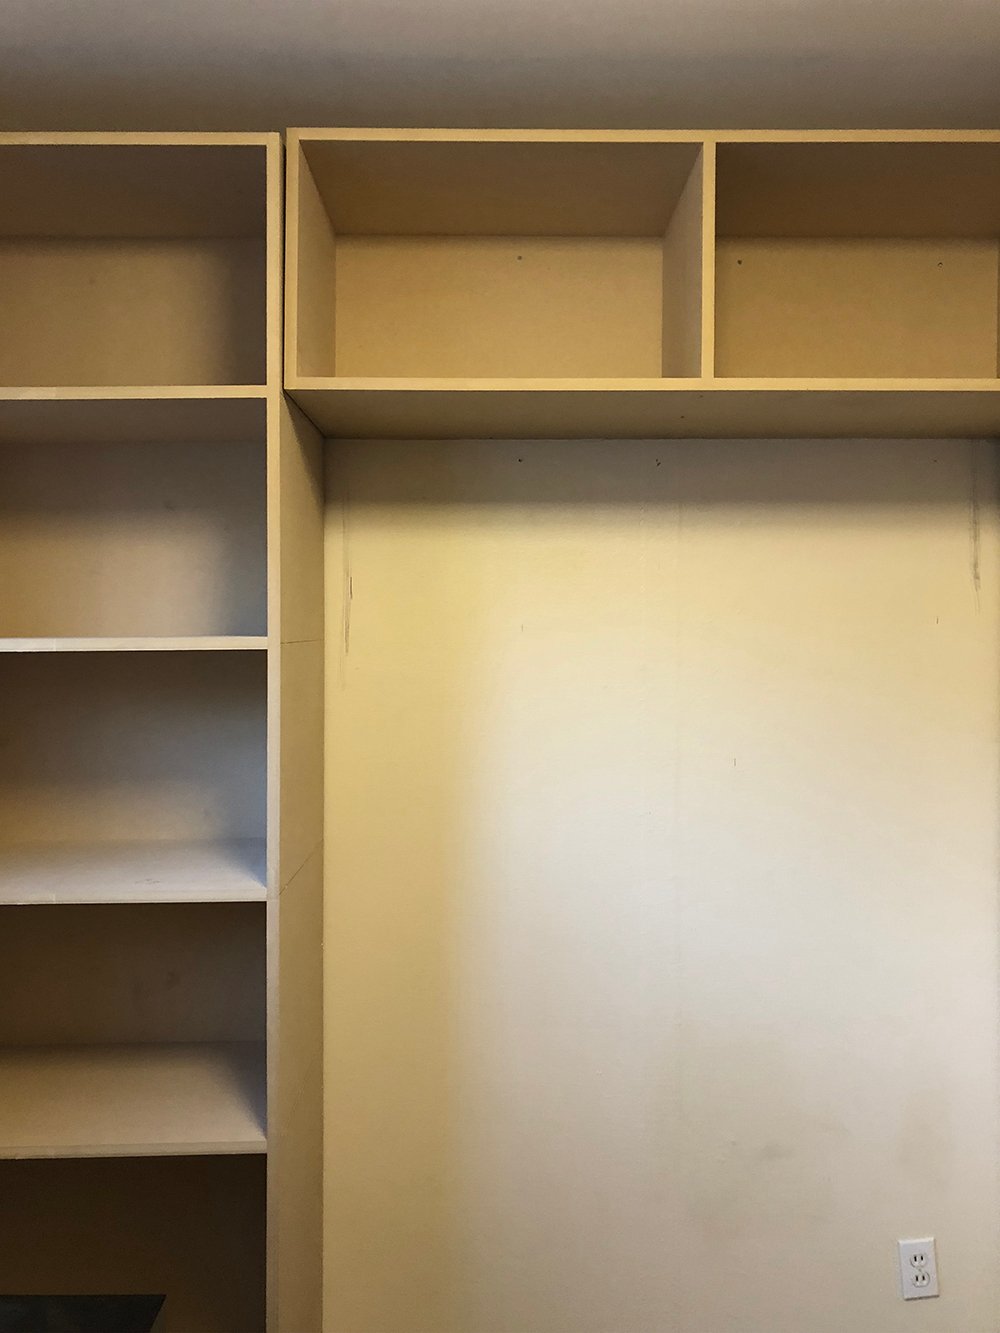 DIY Built-Ins and Office Organization - roomfortuesday.com